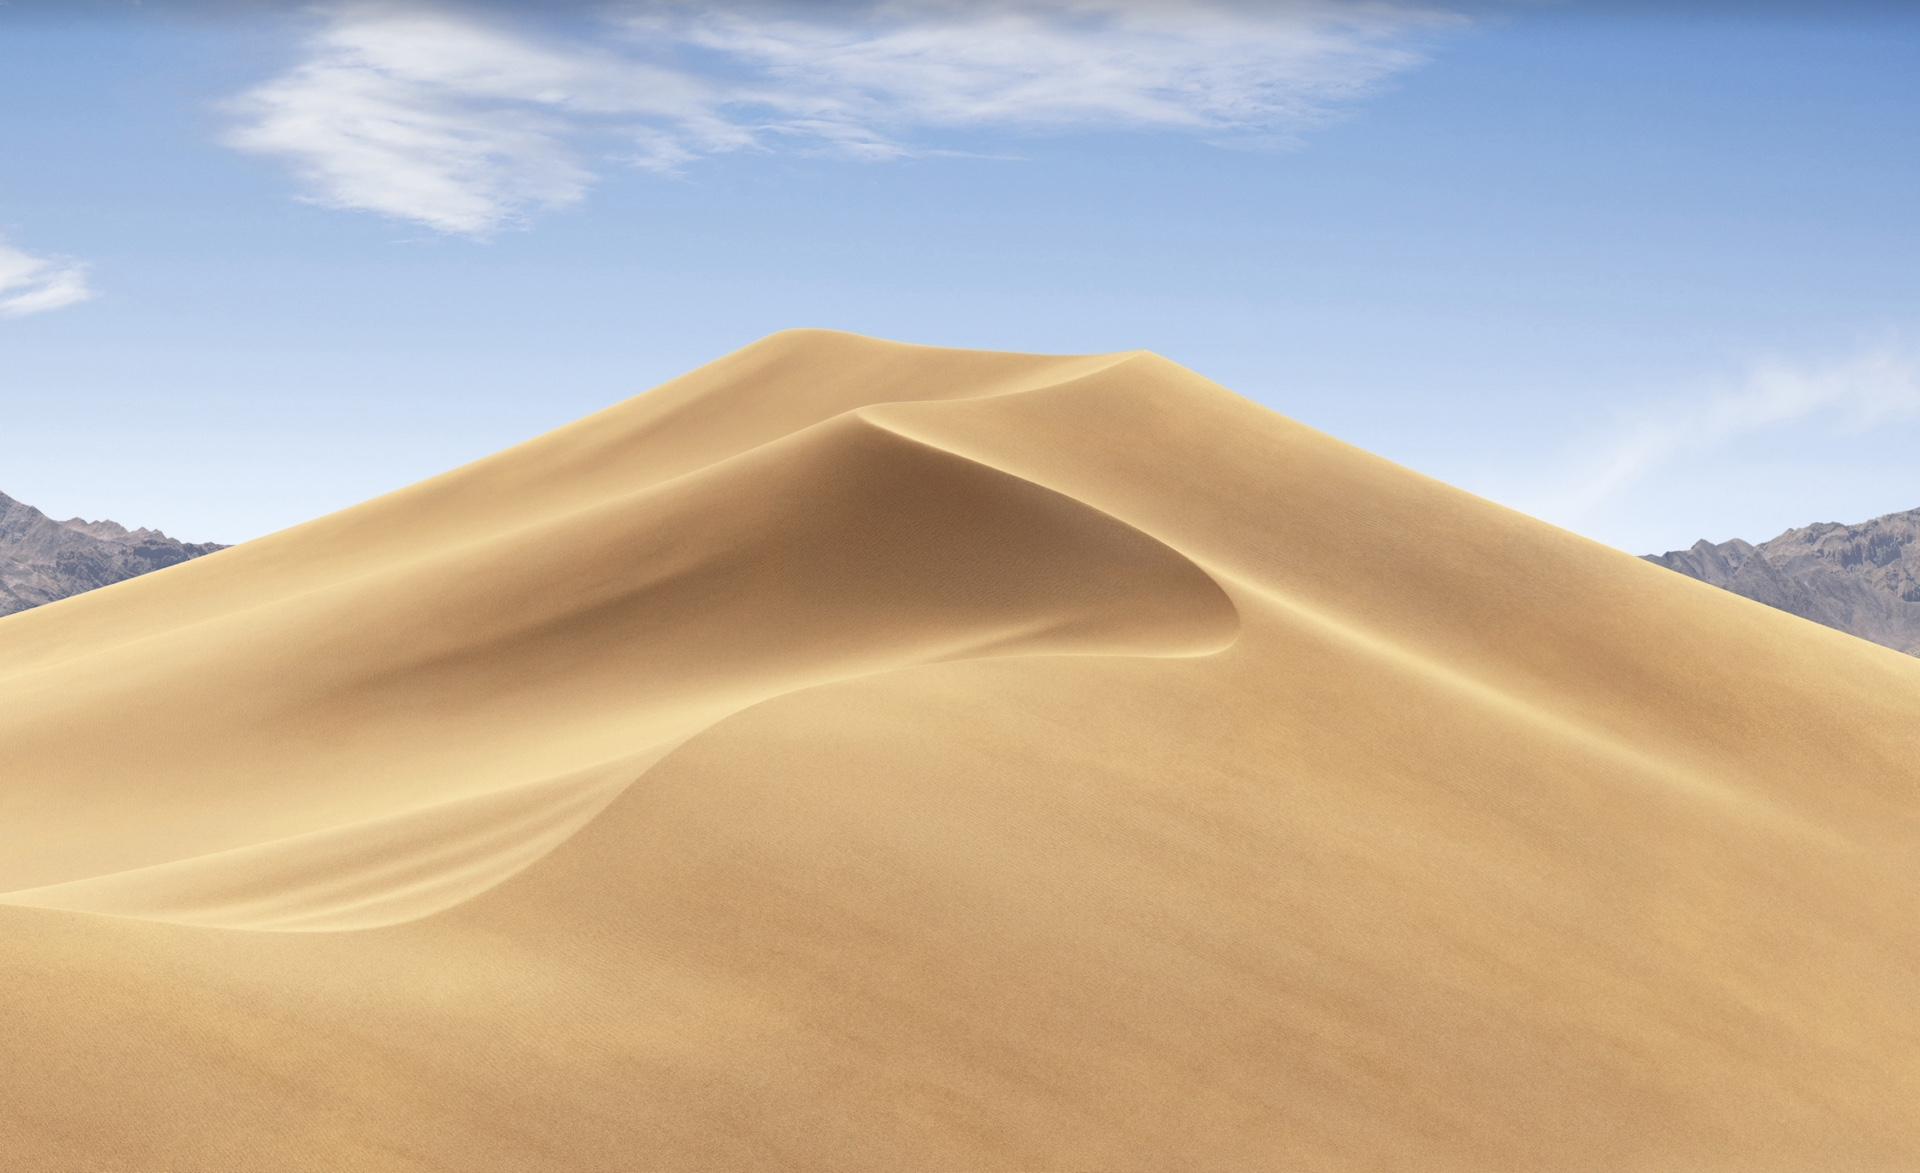 macOS Mojave: A visual tour of Dark Mode and other major